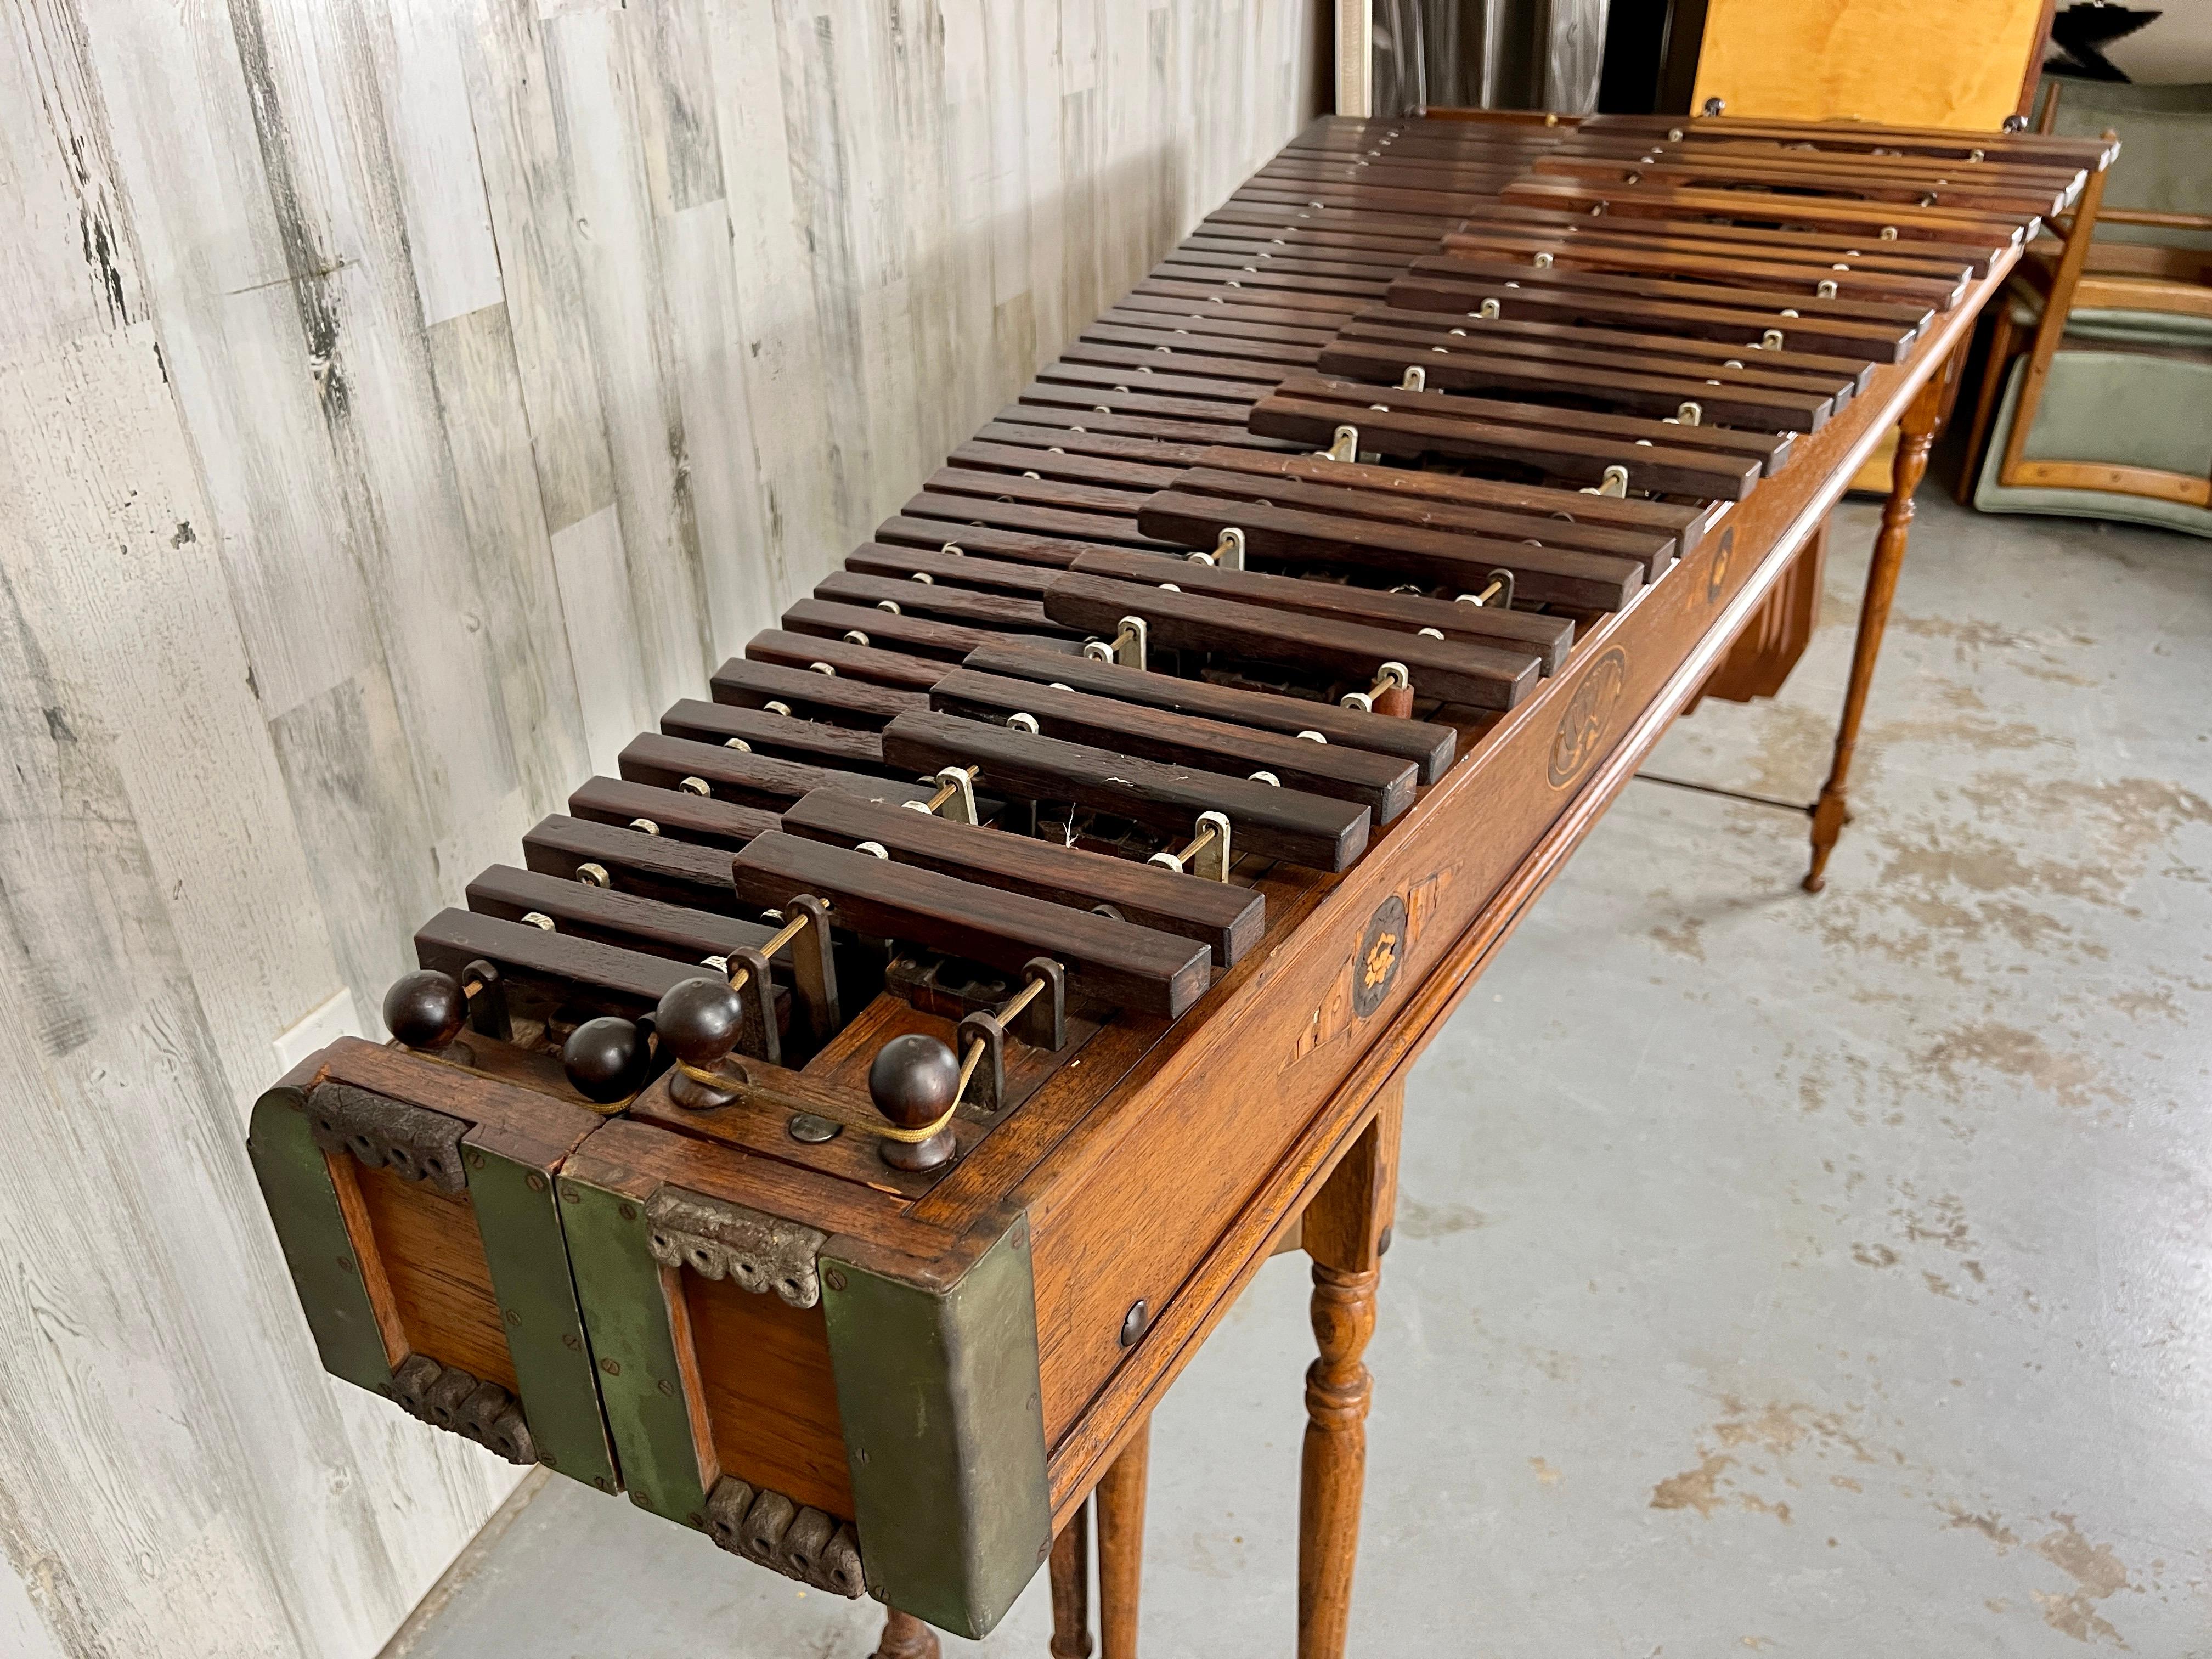 Antique Edwardian Marimba Xylophone with a combination of hardwoods and iron. 
There are two separate tables that bolt together. Each marimba breaks down for transport into three pieces with foldable legs. Only the front instrument has the